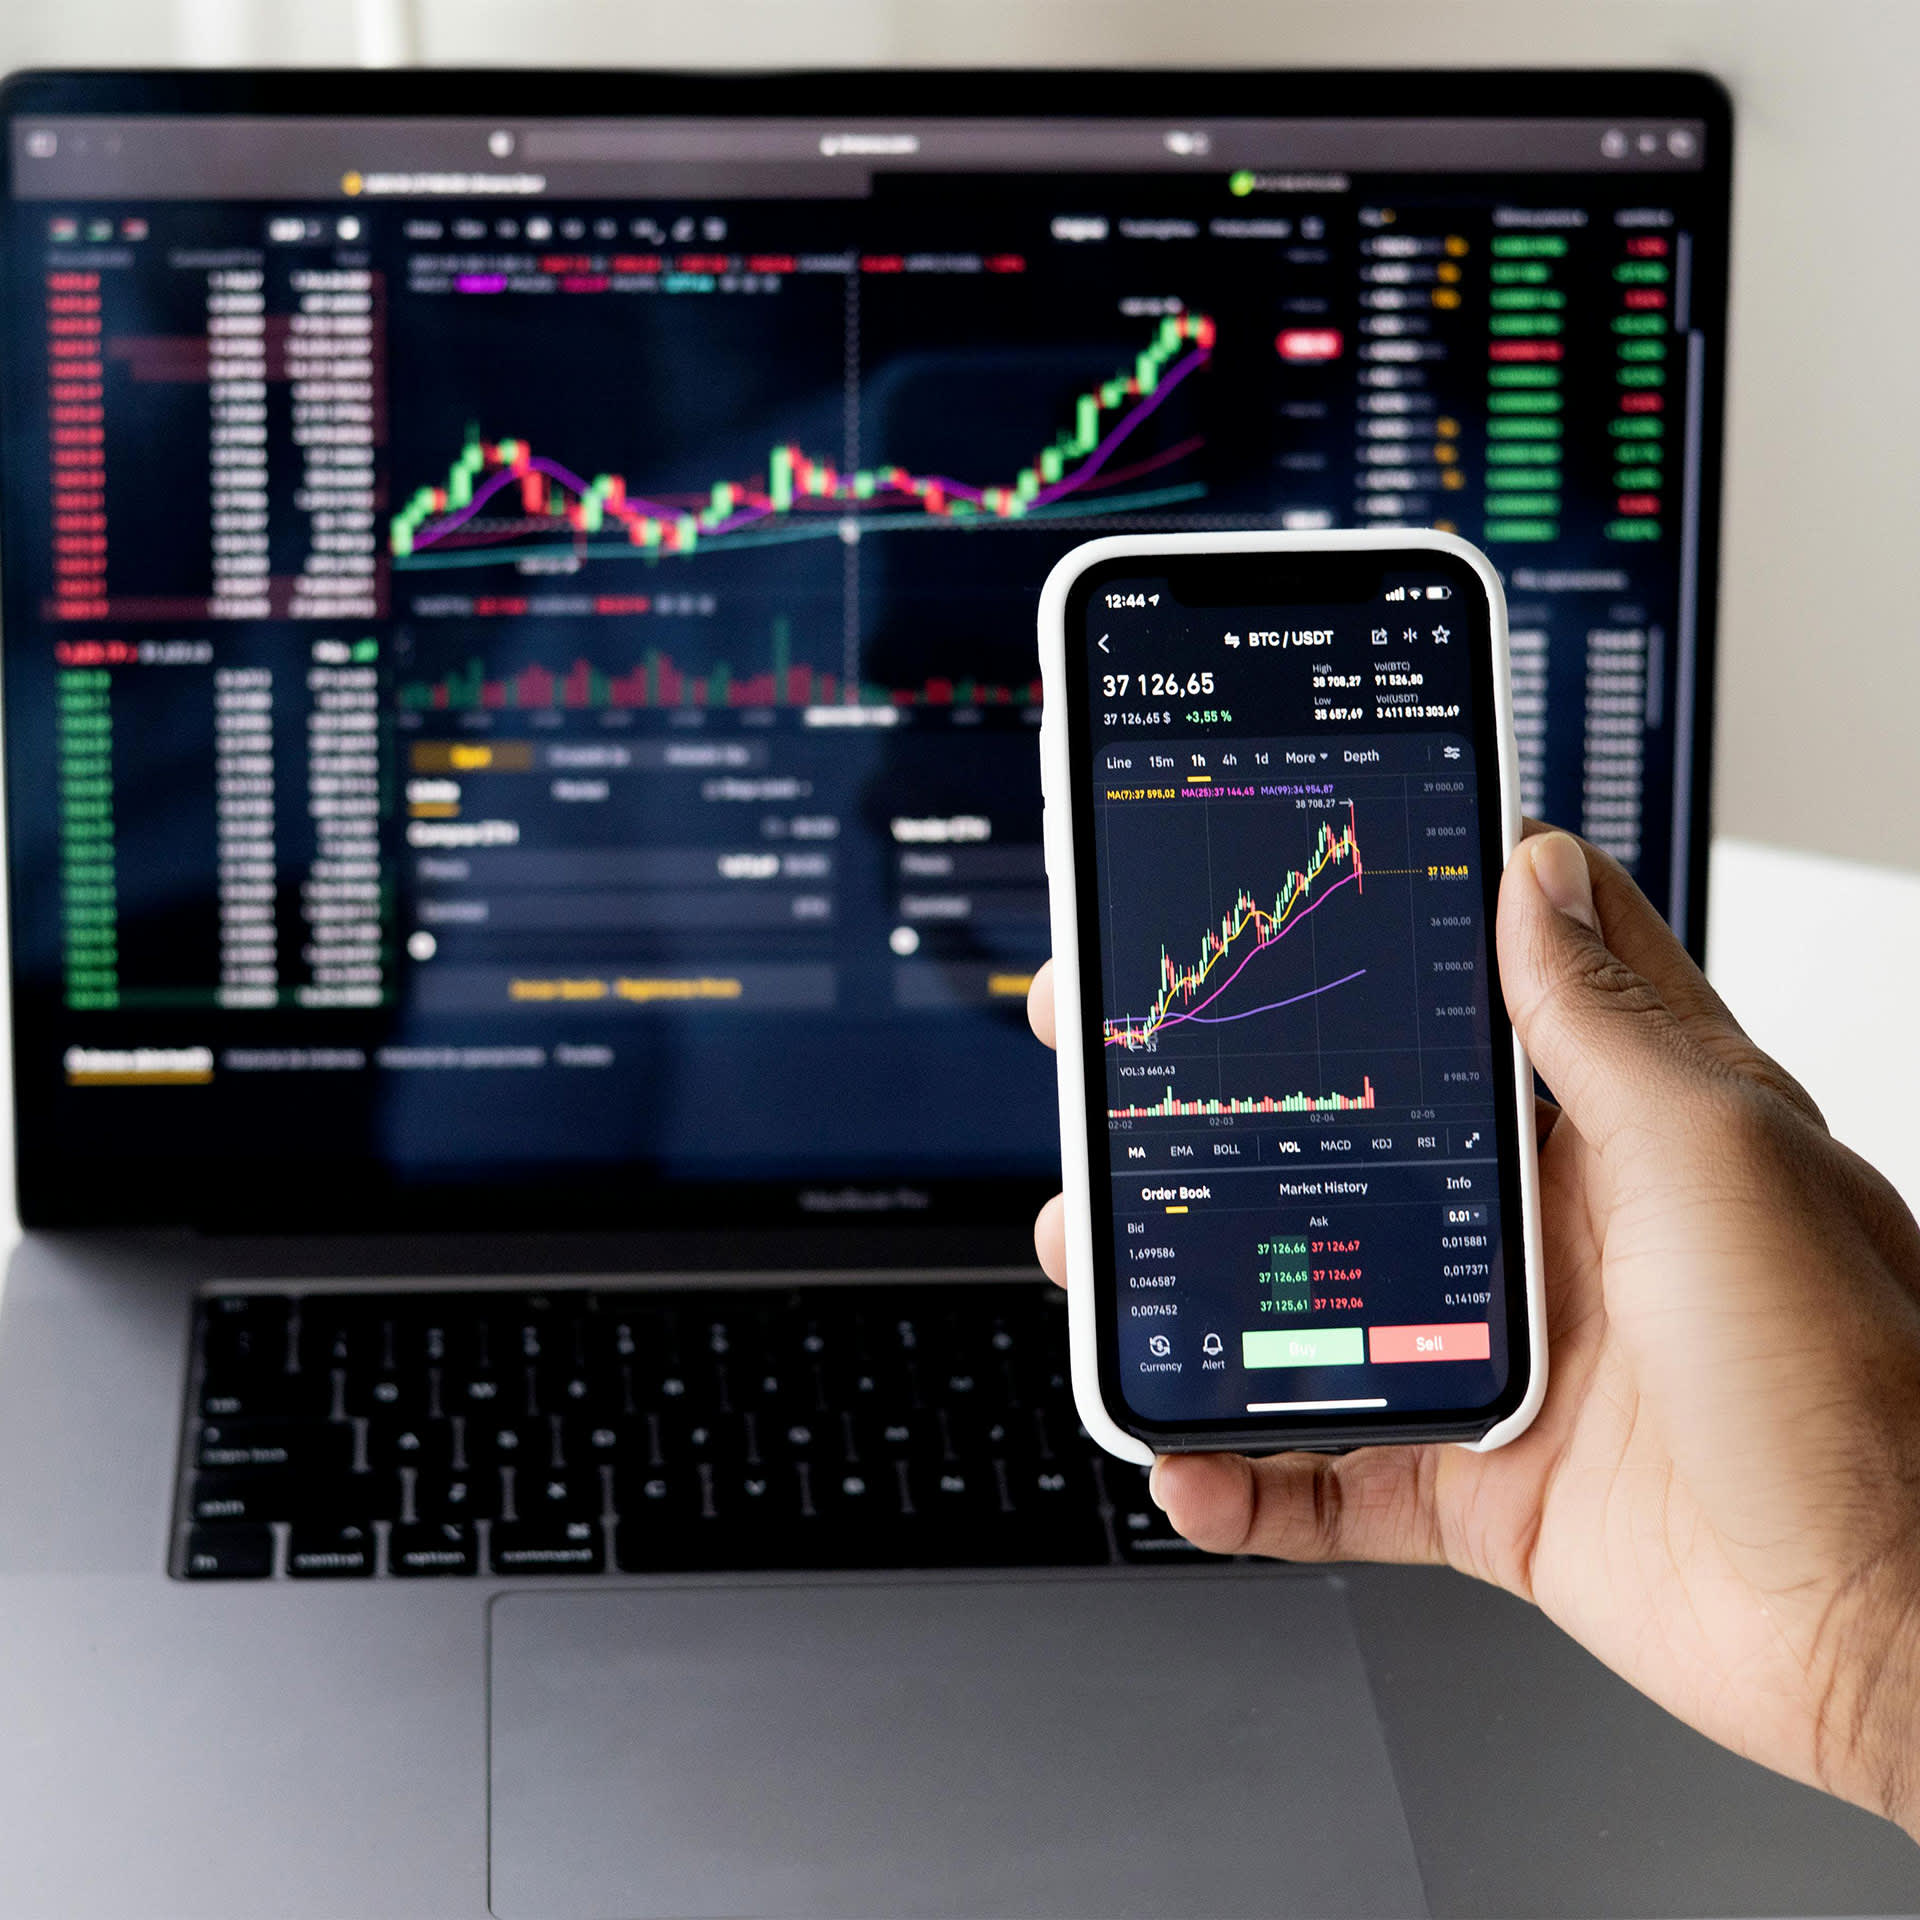 A computer and a phone showing the stock market.